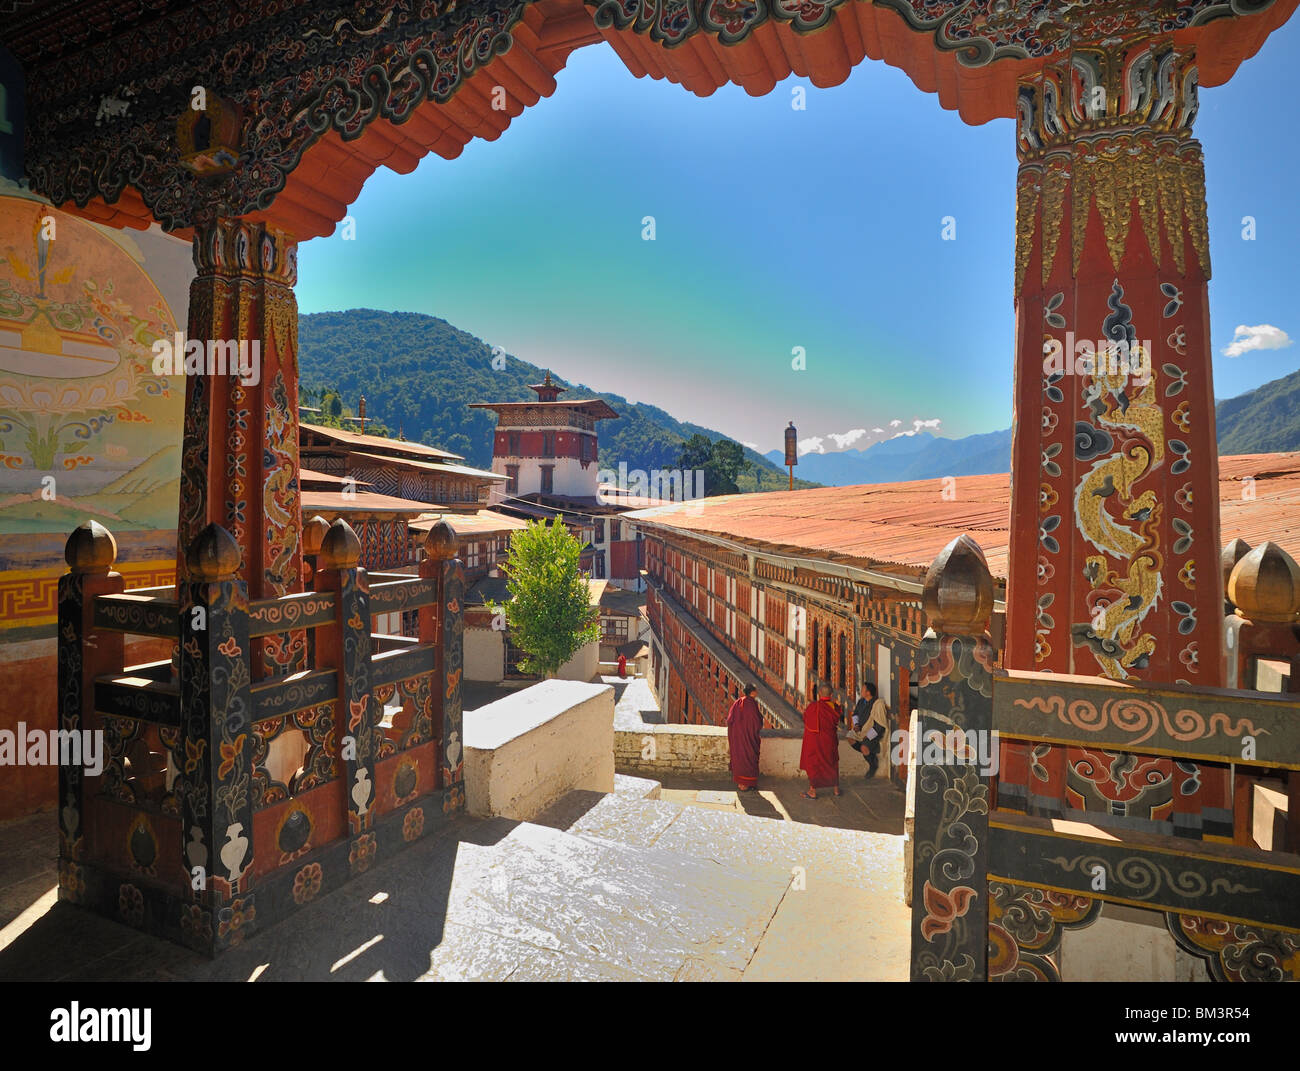 View from temple over courtyard with monks and man in national dress, Trongsa Dzong, Bhutan. Stock Photo